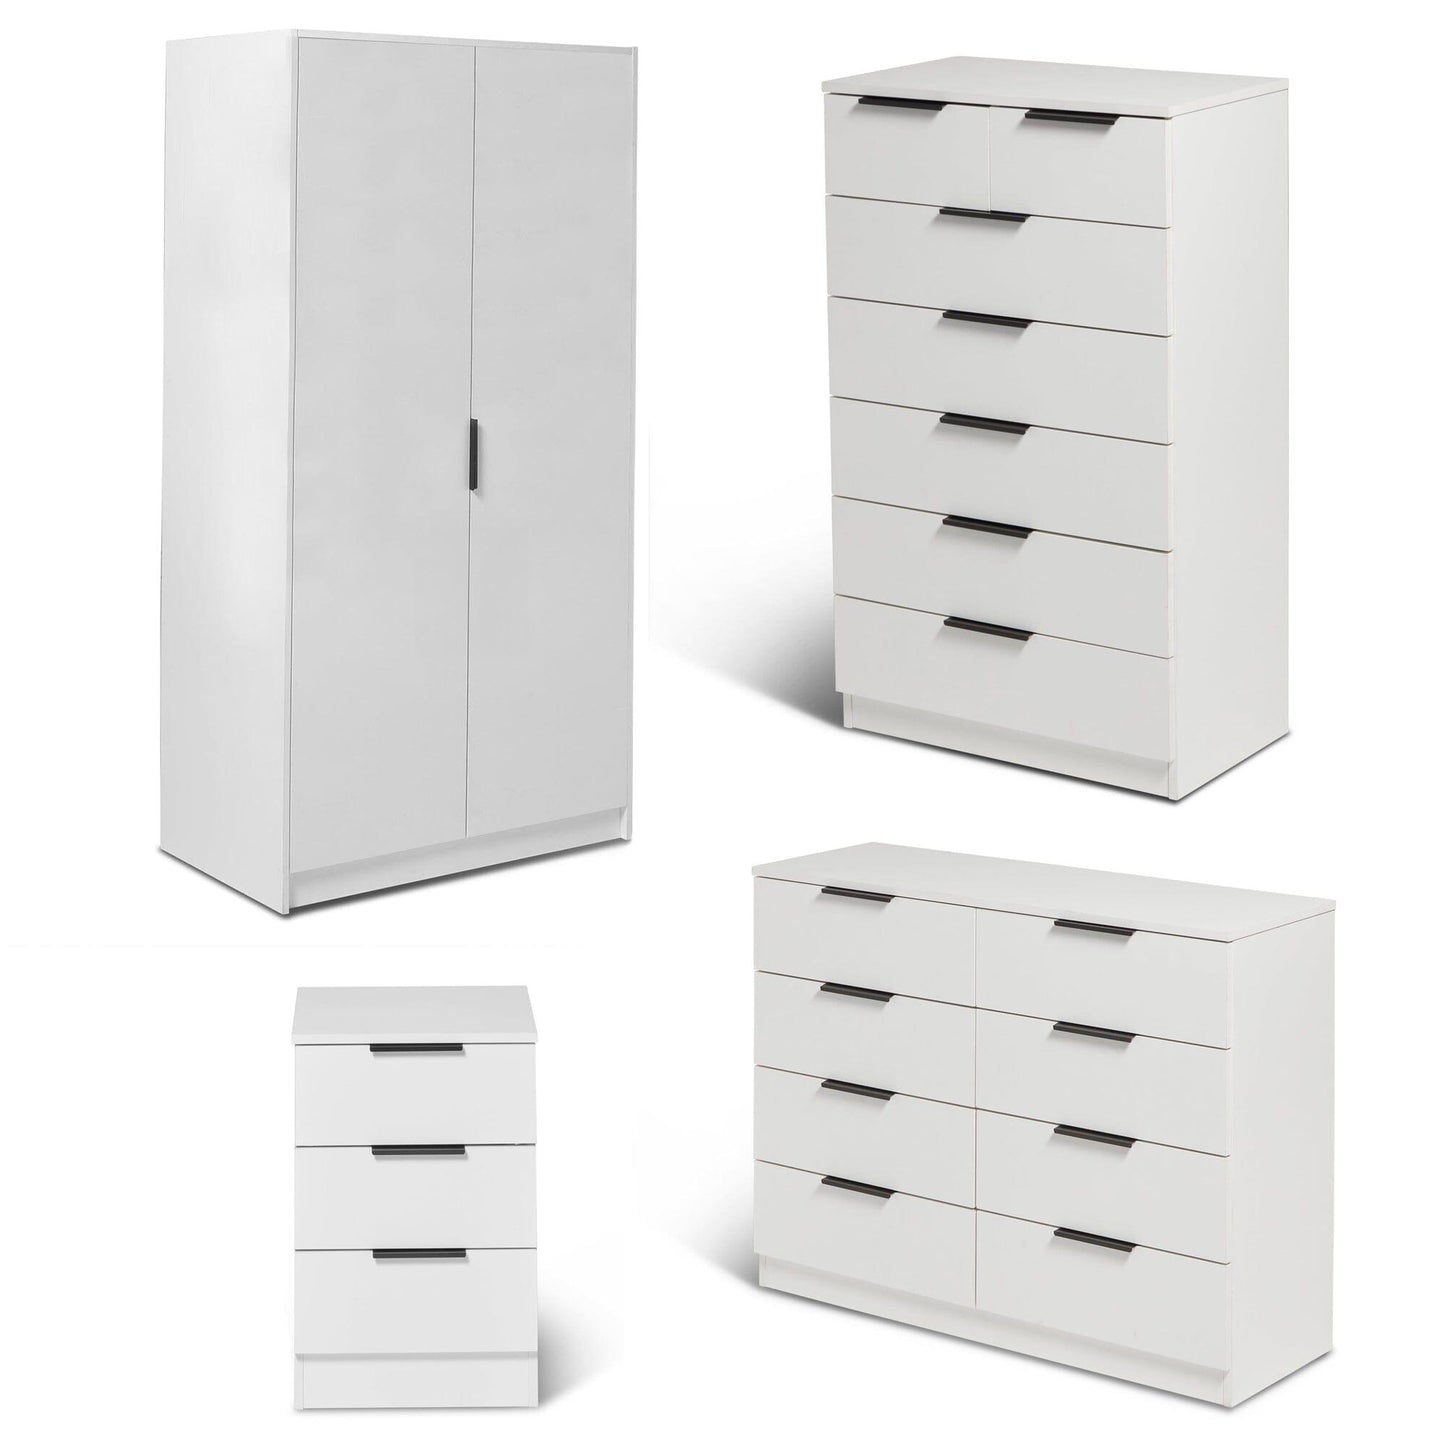 Essie Wardrobe and Drawers Bedroom Set - Pure White